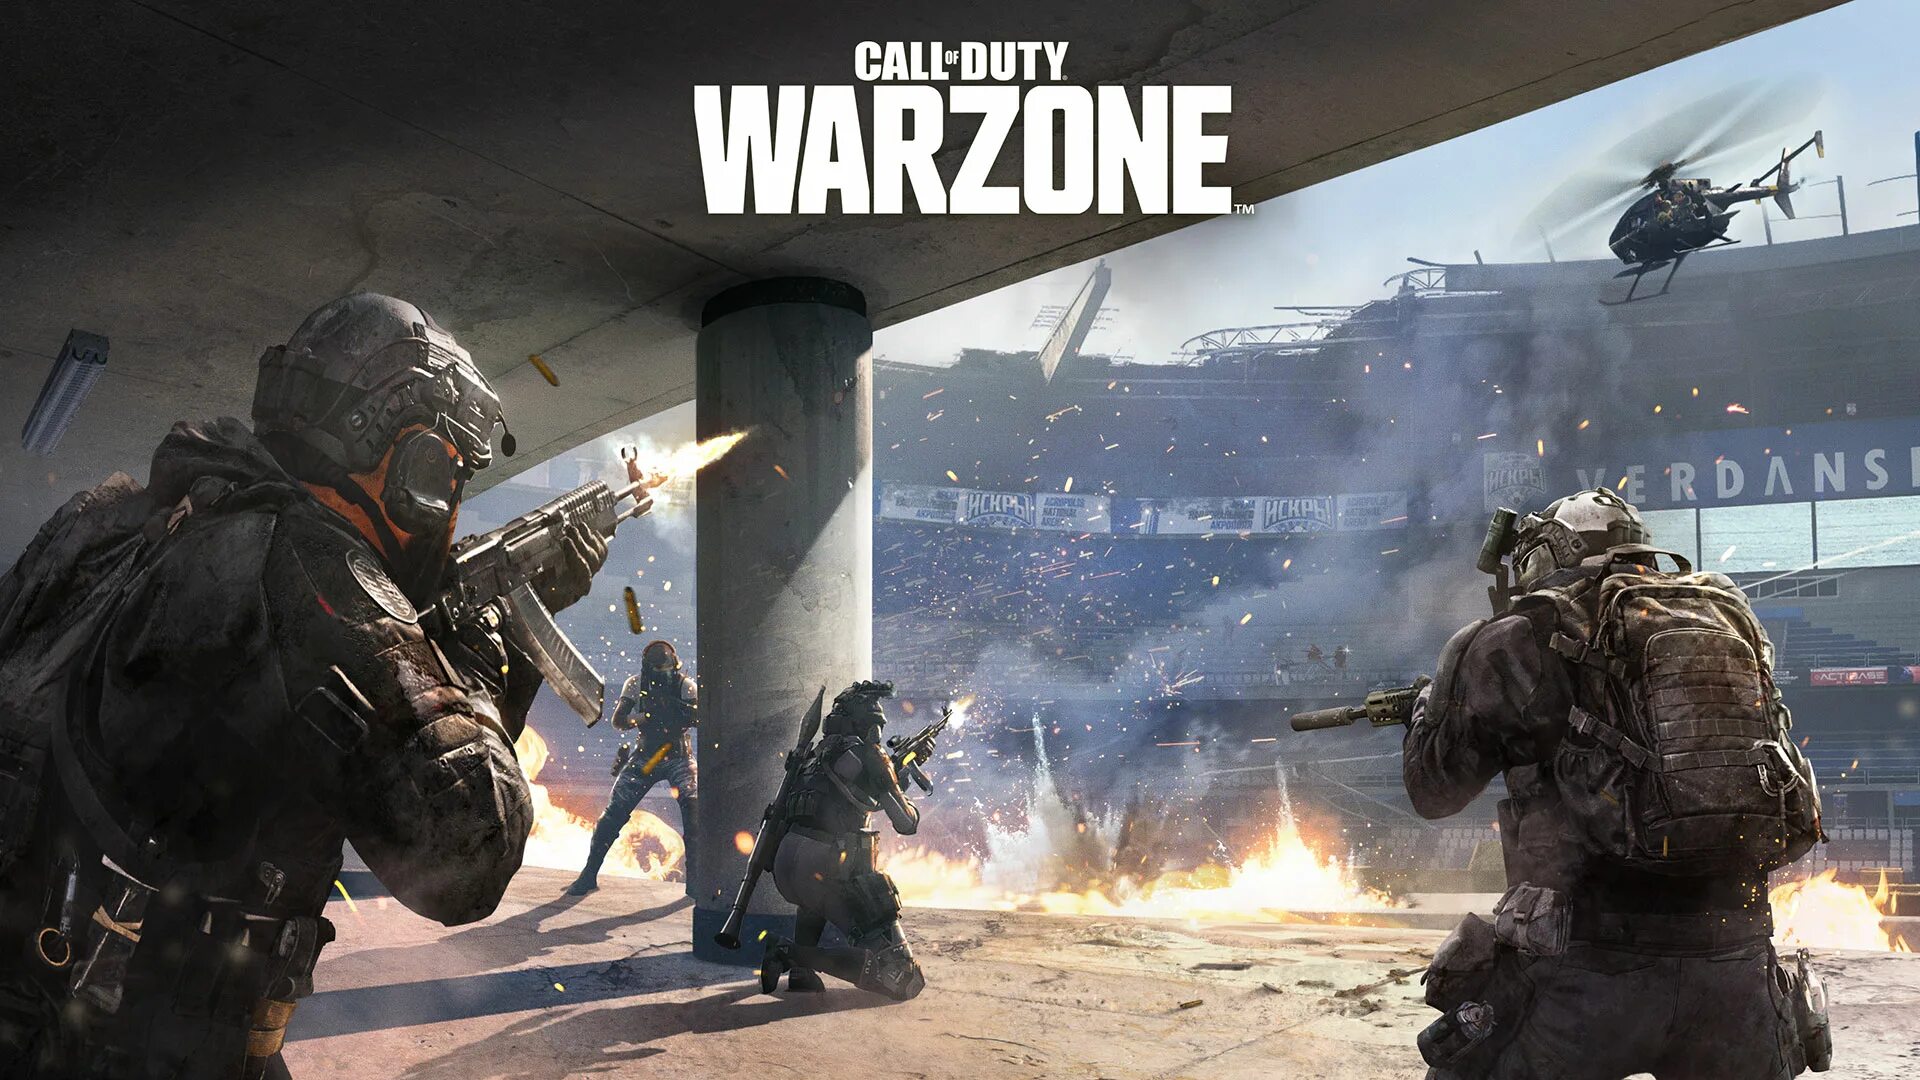 Call of duty warzone mobile аккаунт. Call of Duty Warzone. Варзоне Call of Duty. Варзон 2 Call of Duty. Call of Duty Warzone 2.